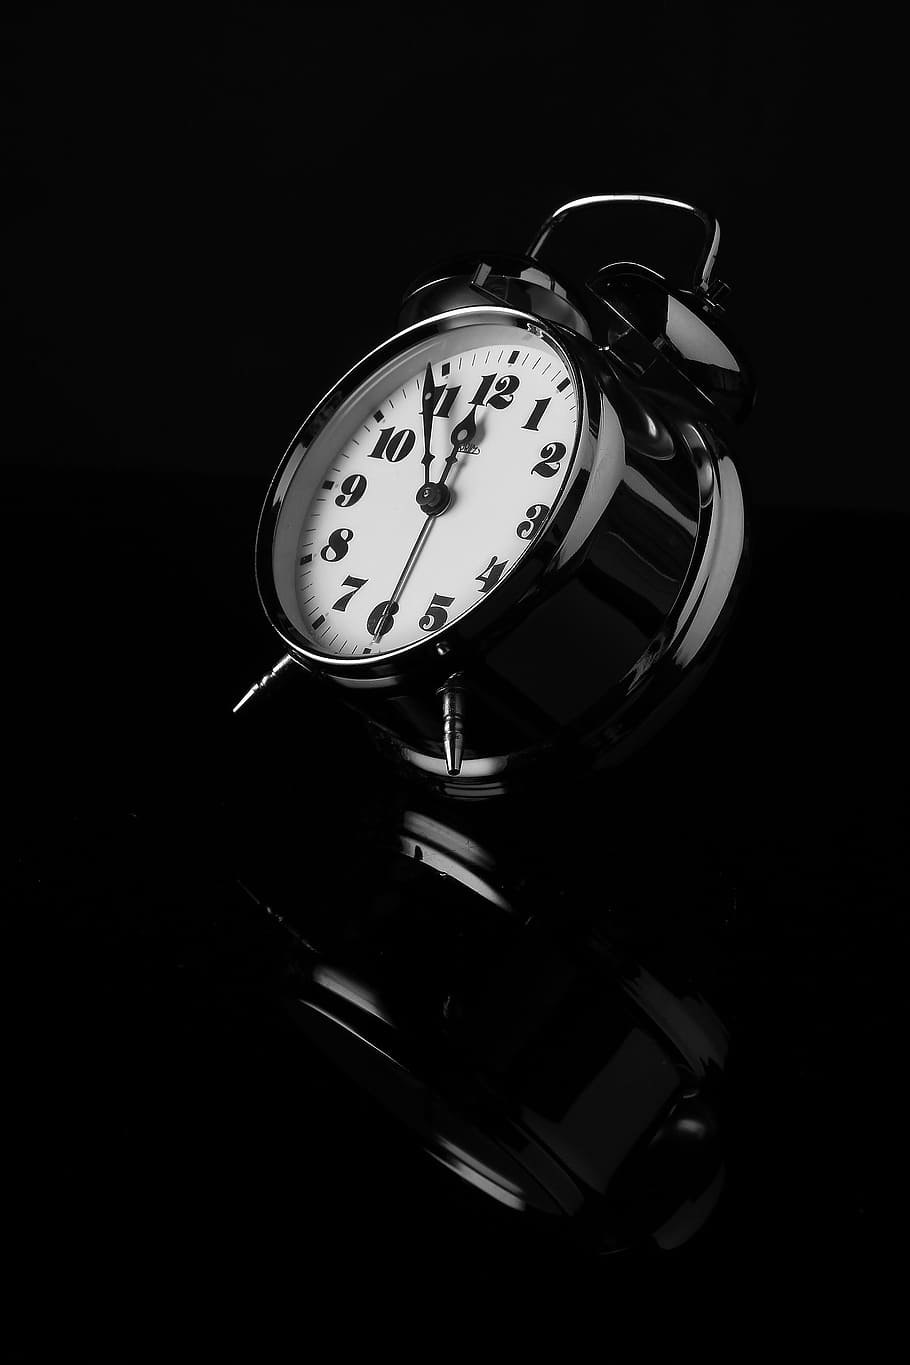 white, black, table alarm clock, alarm clock, black and white, reflection, clock, dial, the ringing, time